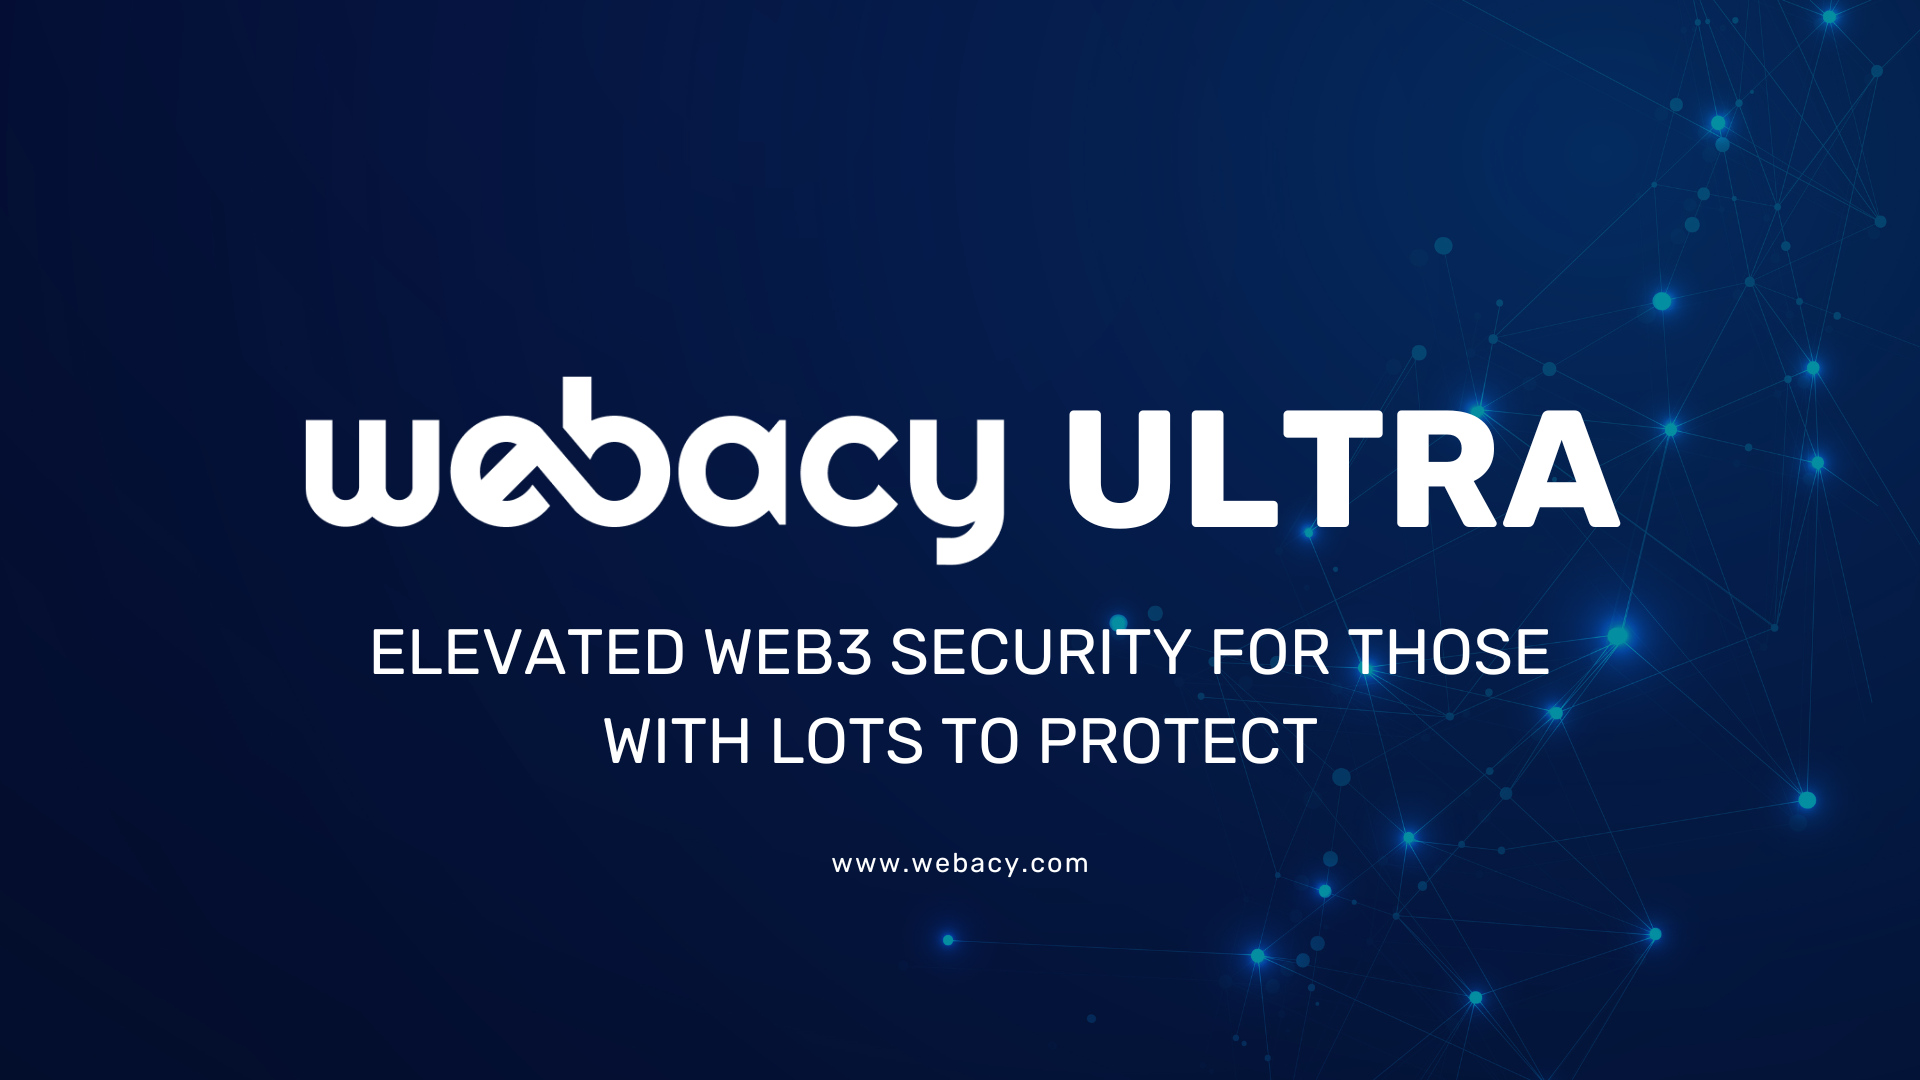 Webacy Ultra: Elevated Web3 Security for Those With Lots to Protect